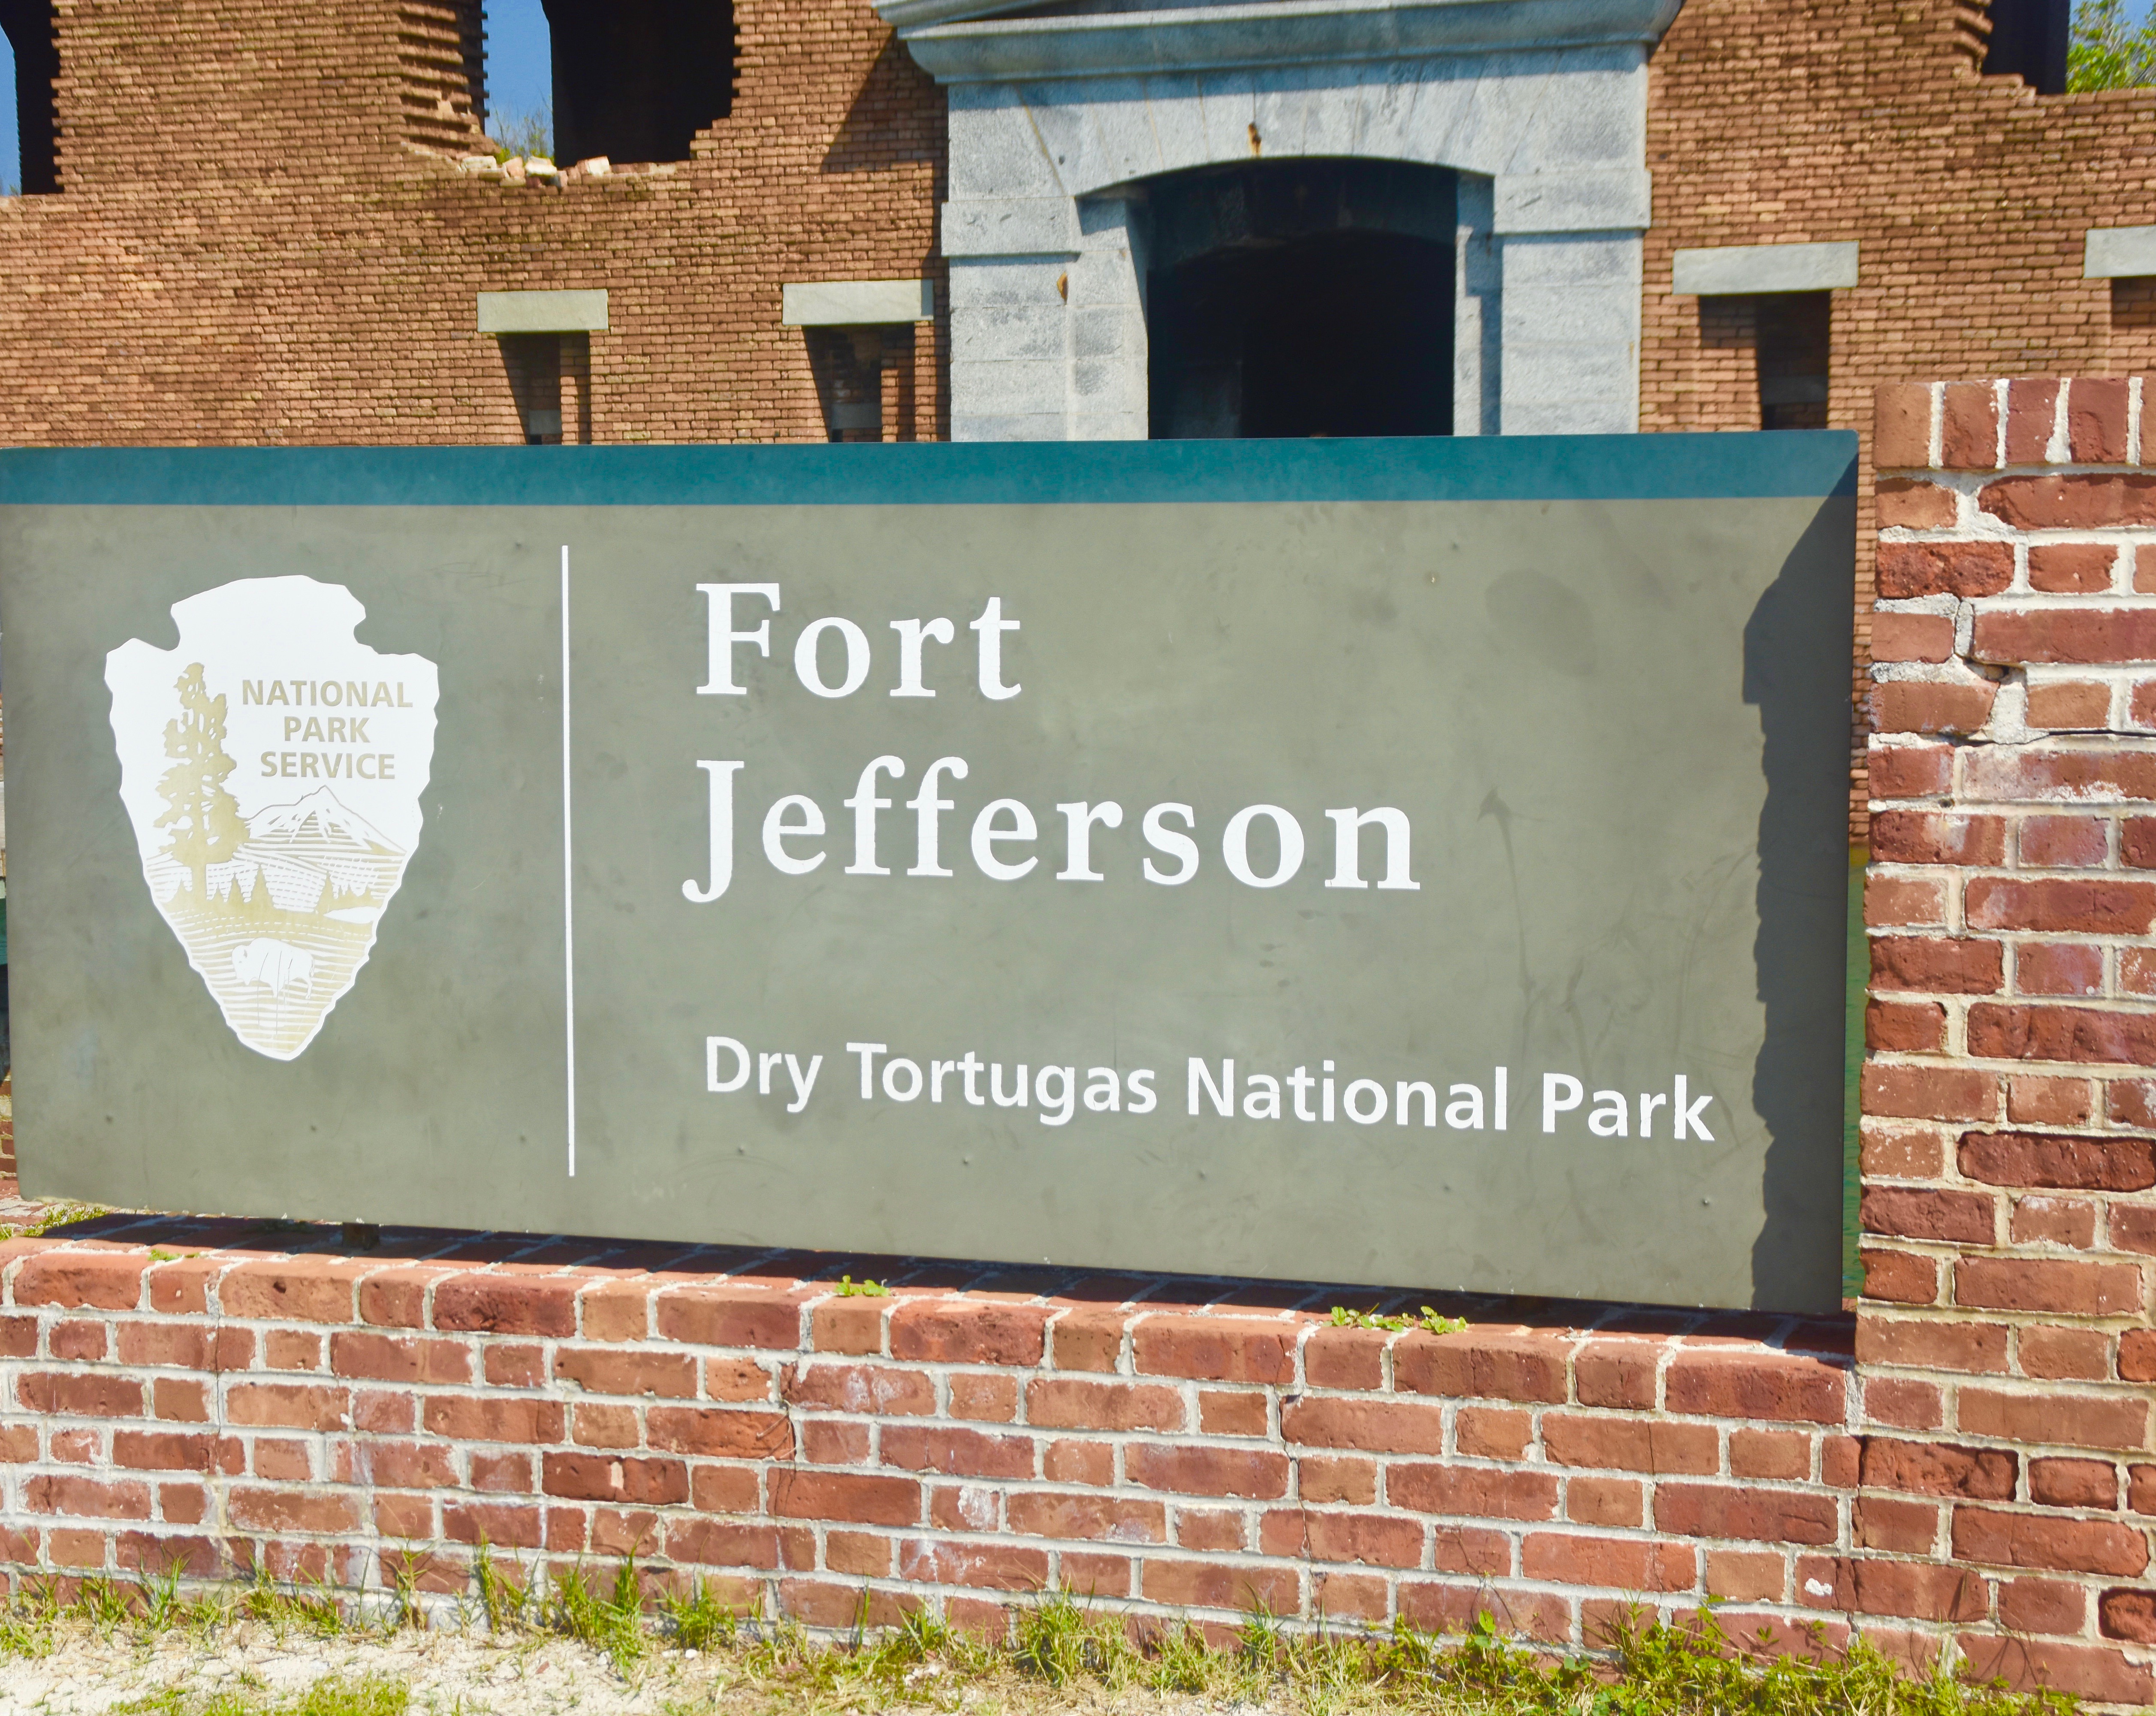 Welcome to Fort Jefferson, Dry Tortugas